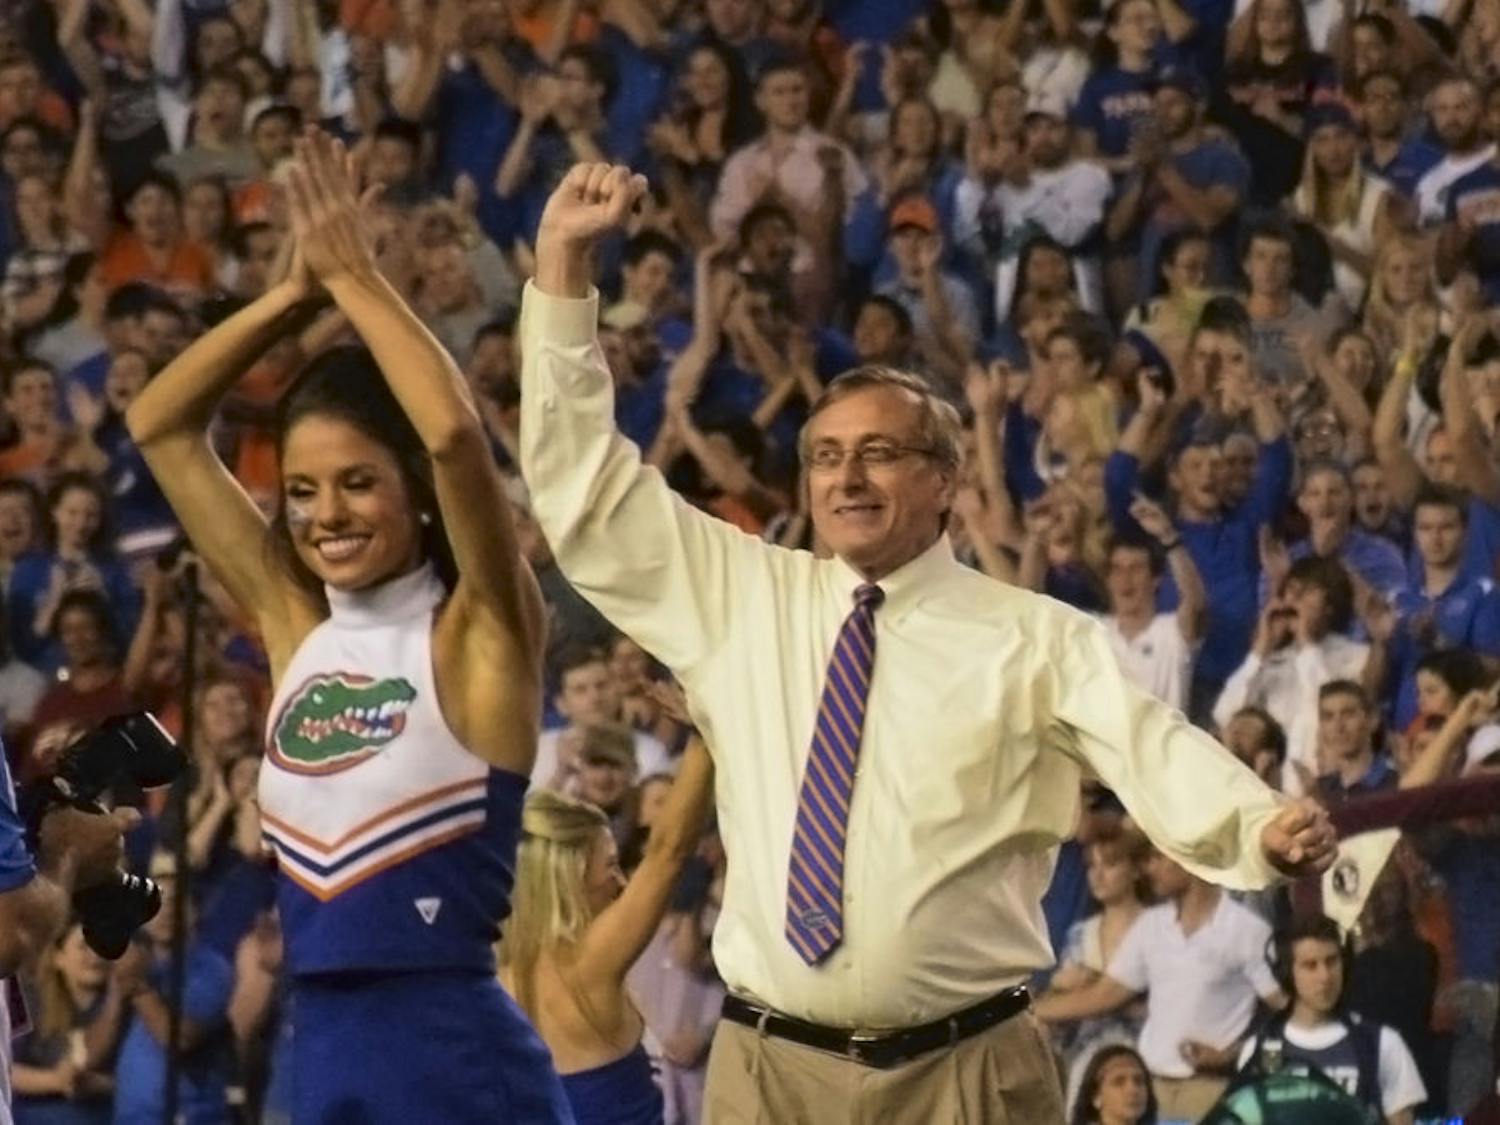 UF President Kent Fuchs leads a crowd of more than 90,000 people in a cheer as honorary Mr. Two Bits before the Florida State University game on Nov. 28, 2015, in Ben Hill Griffin Stadium. “It was incredible,” he said afterwards, about leading the cheer.